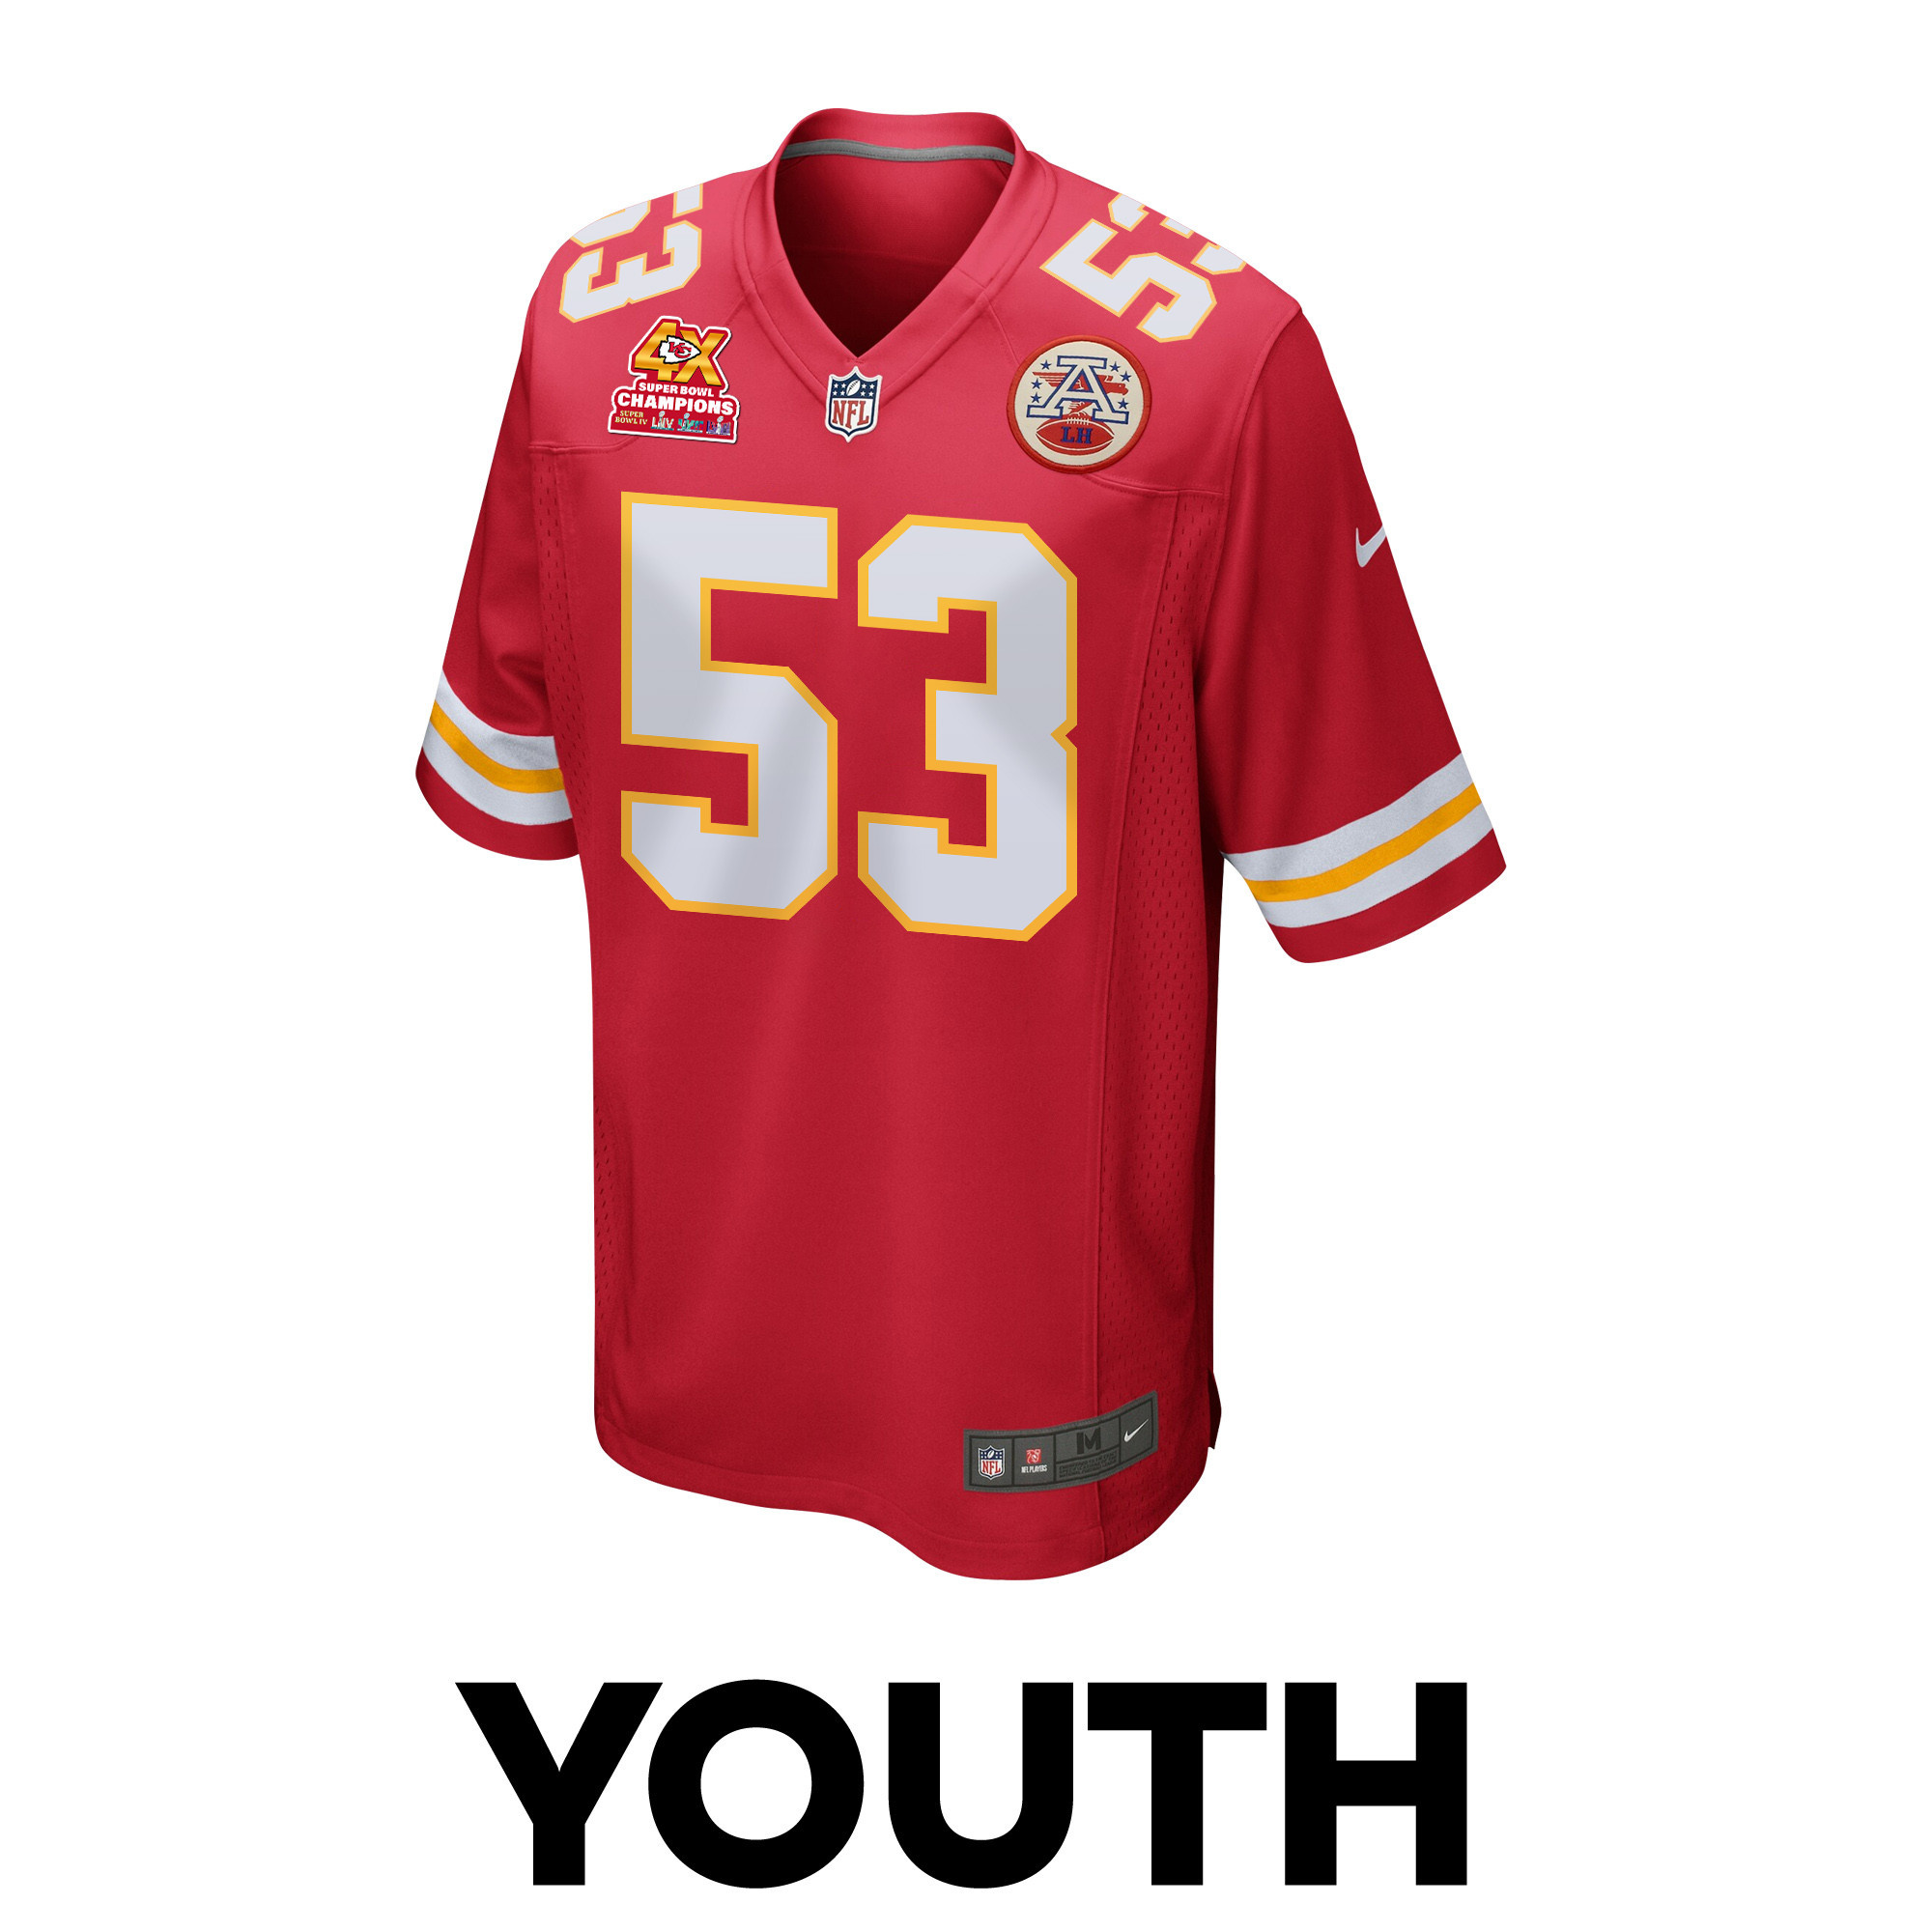 BJ Thompson 53 Kansas City Chiefs Super Bowl LVIII Champions 4X Game YOUTH Jersey - Red